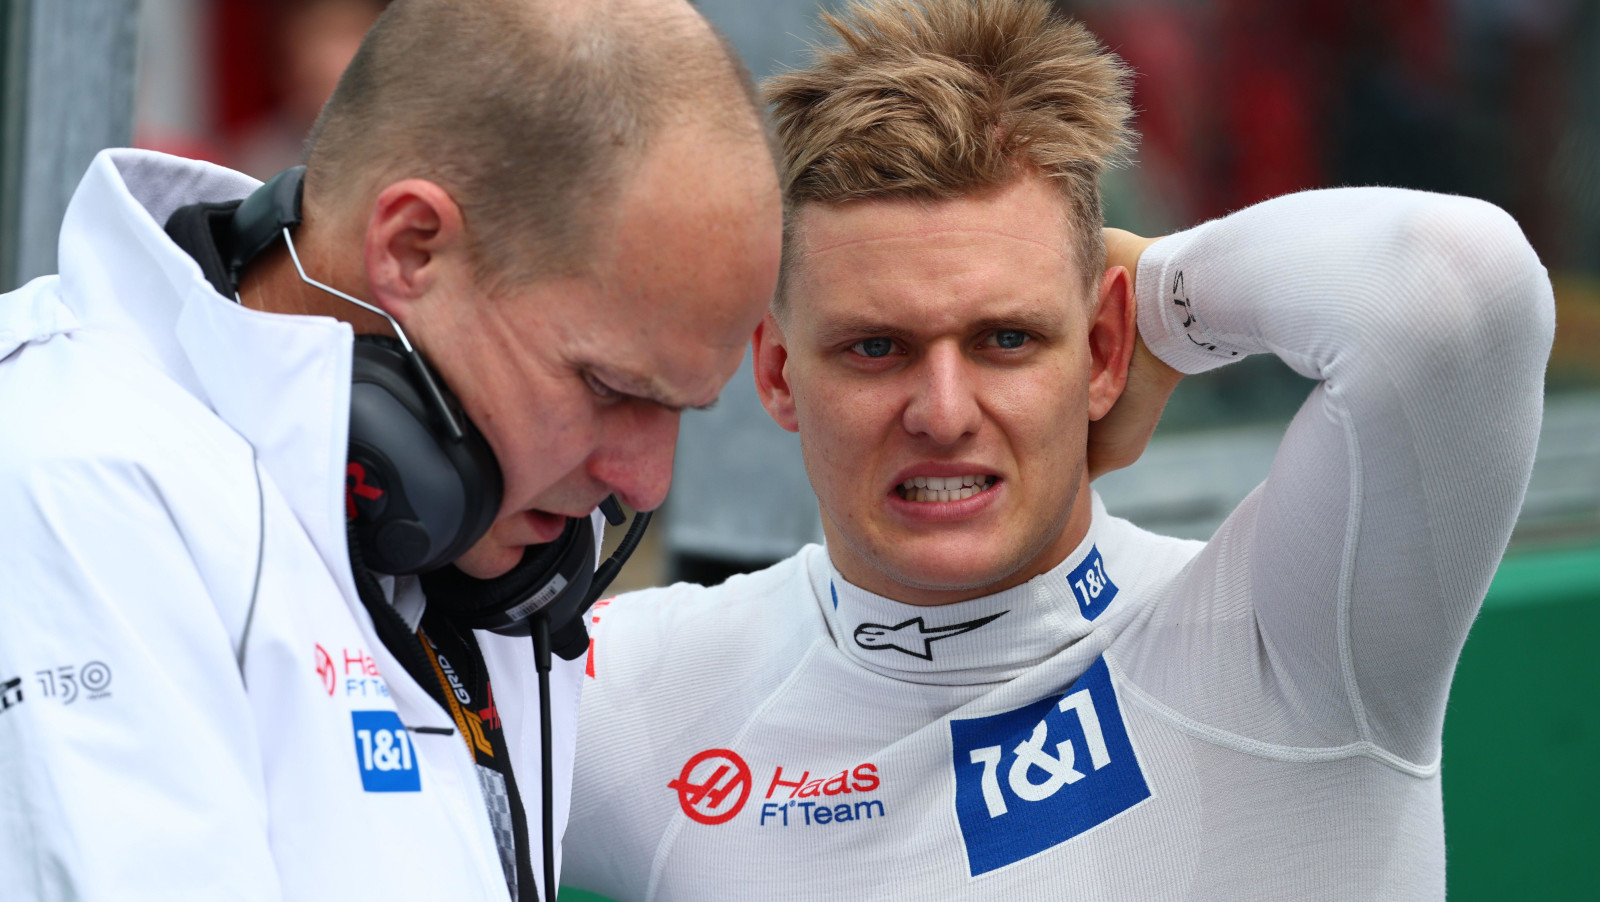 Mick Schumacher yikes with engineer Gary Gannon on the grid. Imola April 2022